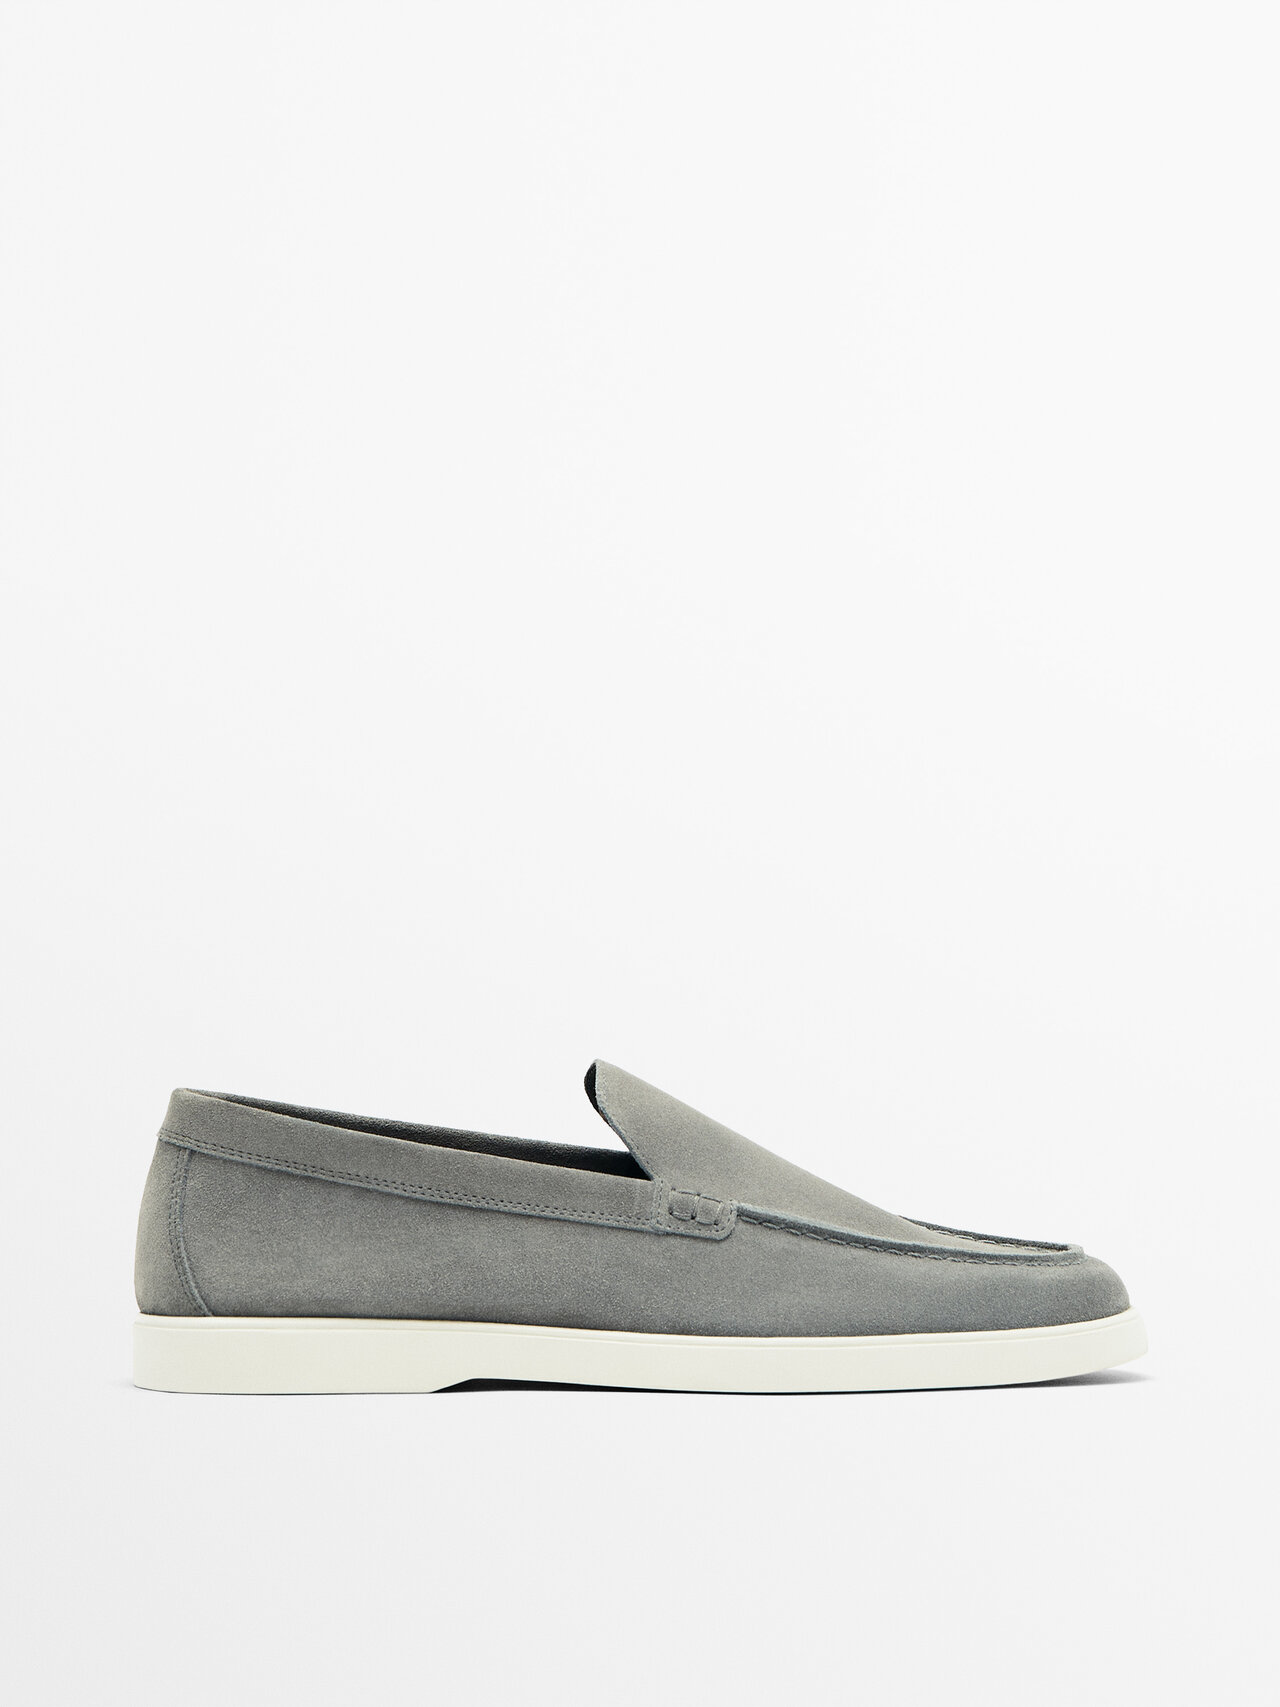 Massimo Dutti Split Suede Leather Loafers In Grey